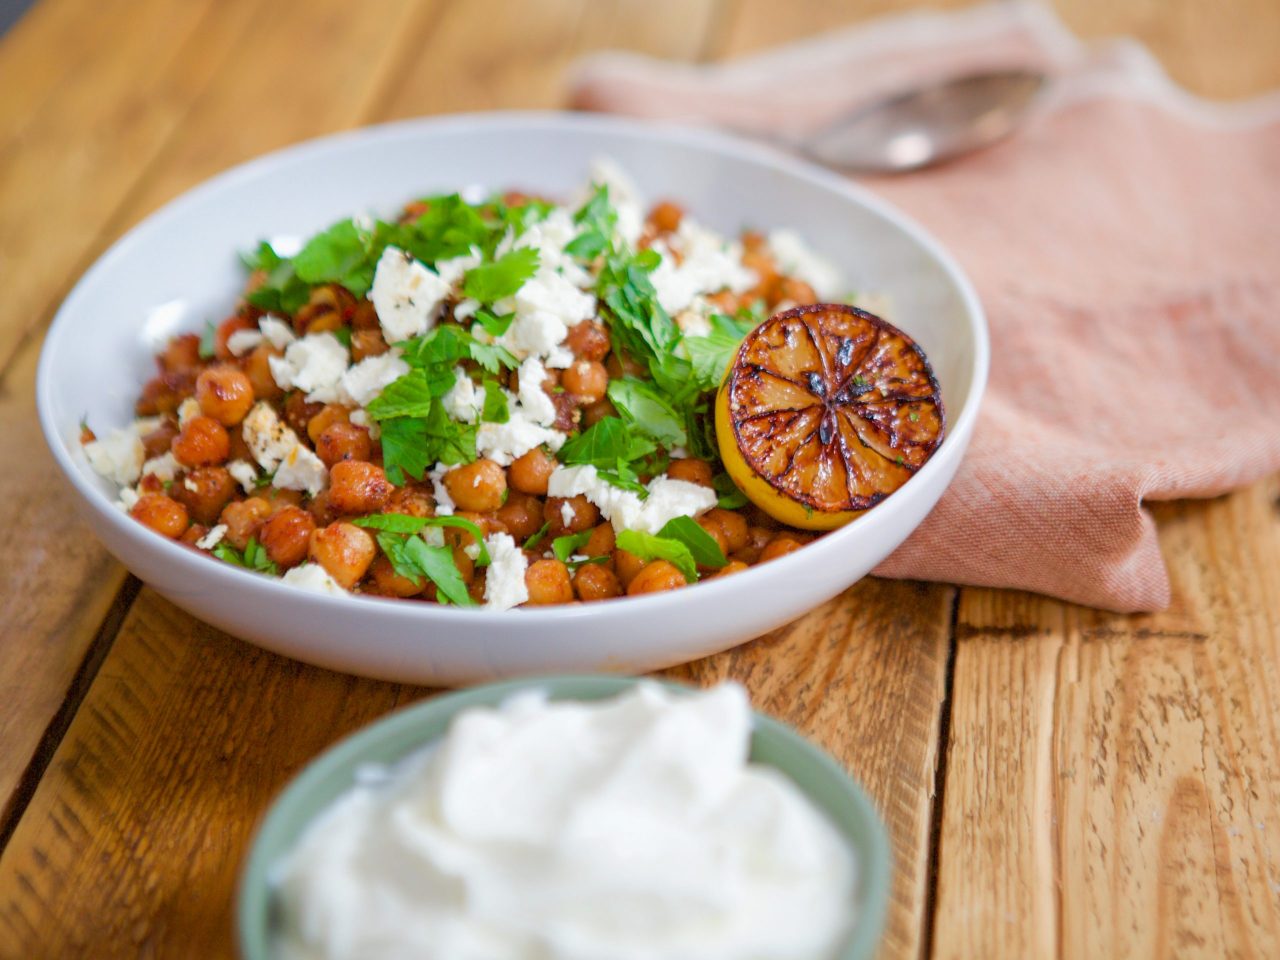 Molly Yeh's Harissa-braised Chickpeas with Feta, as seen on Girl Meets Farm